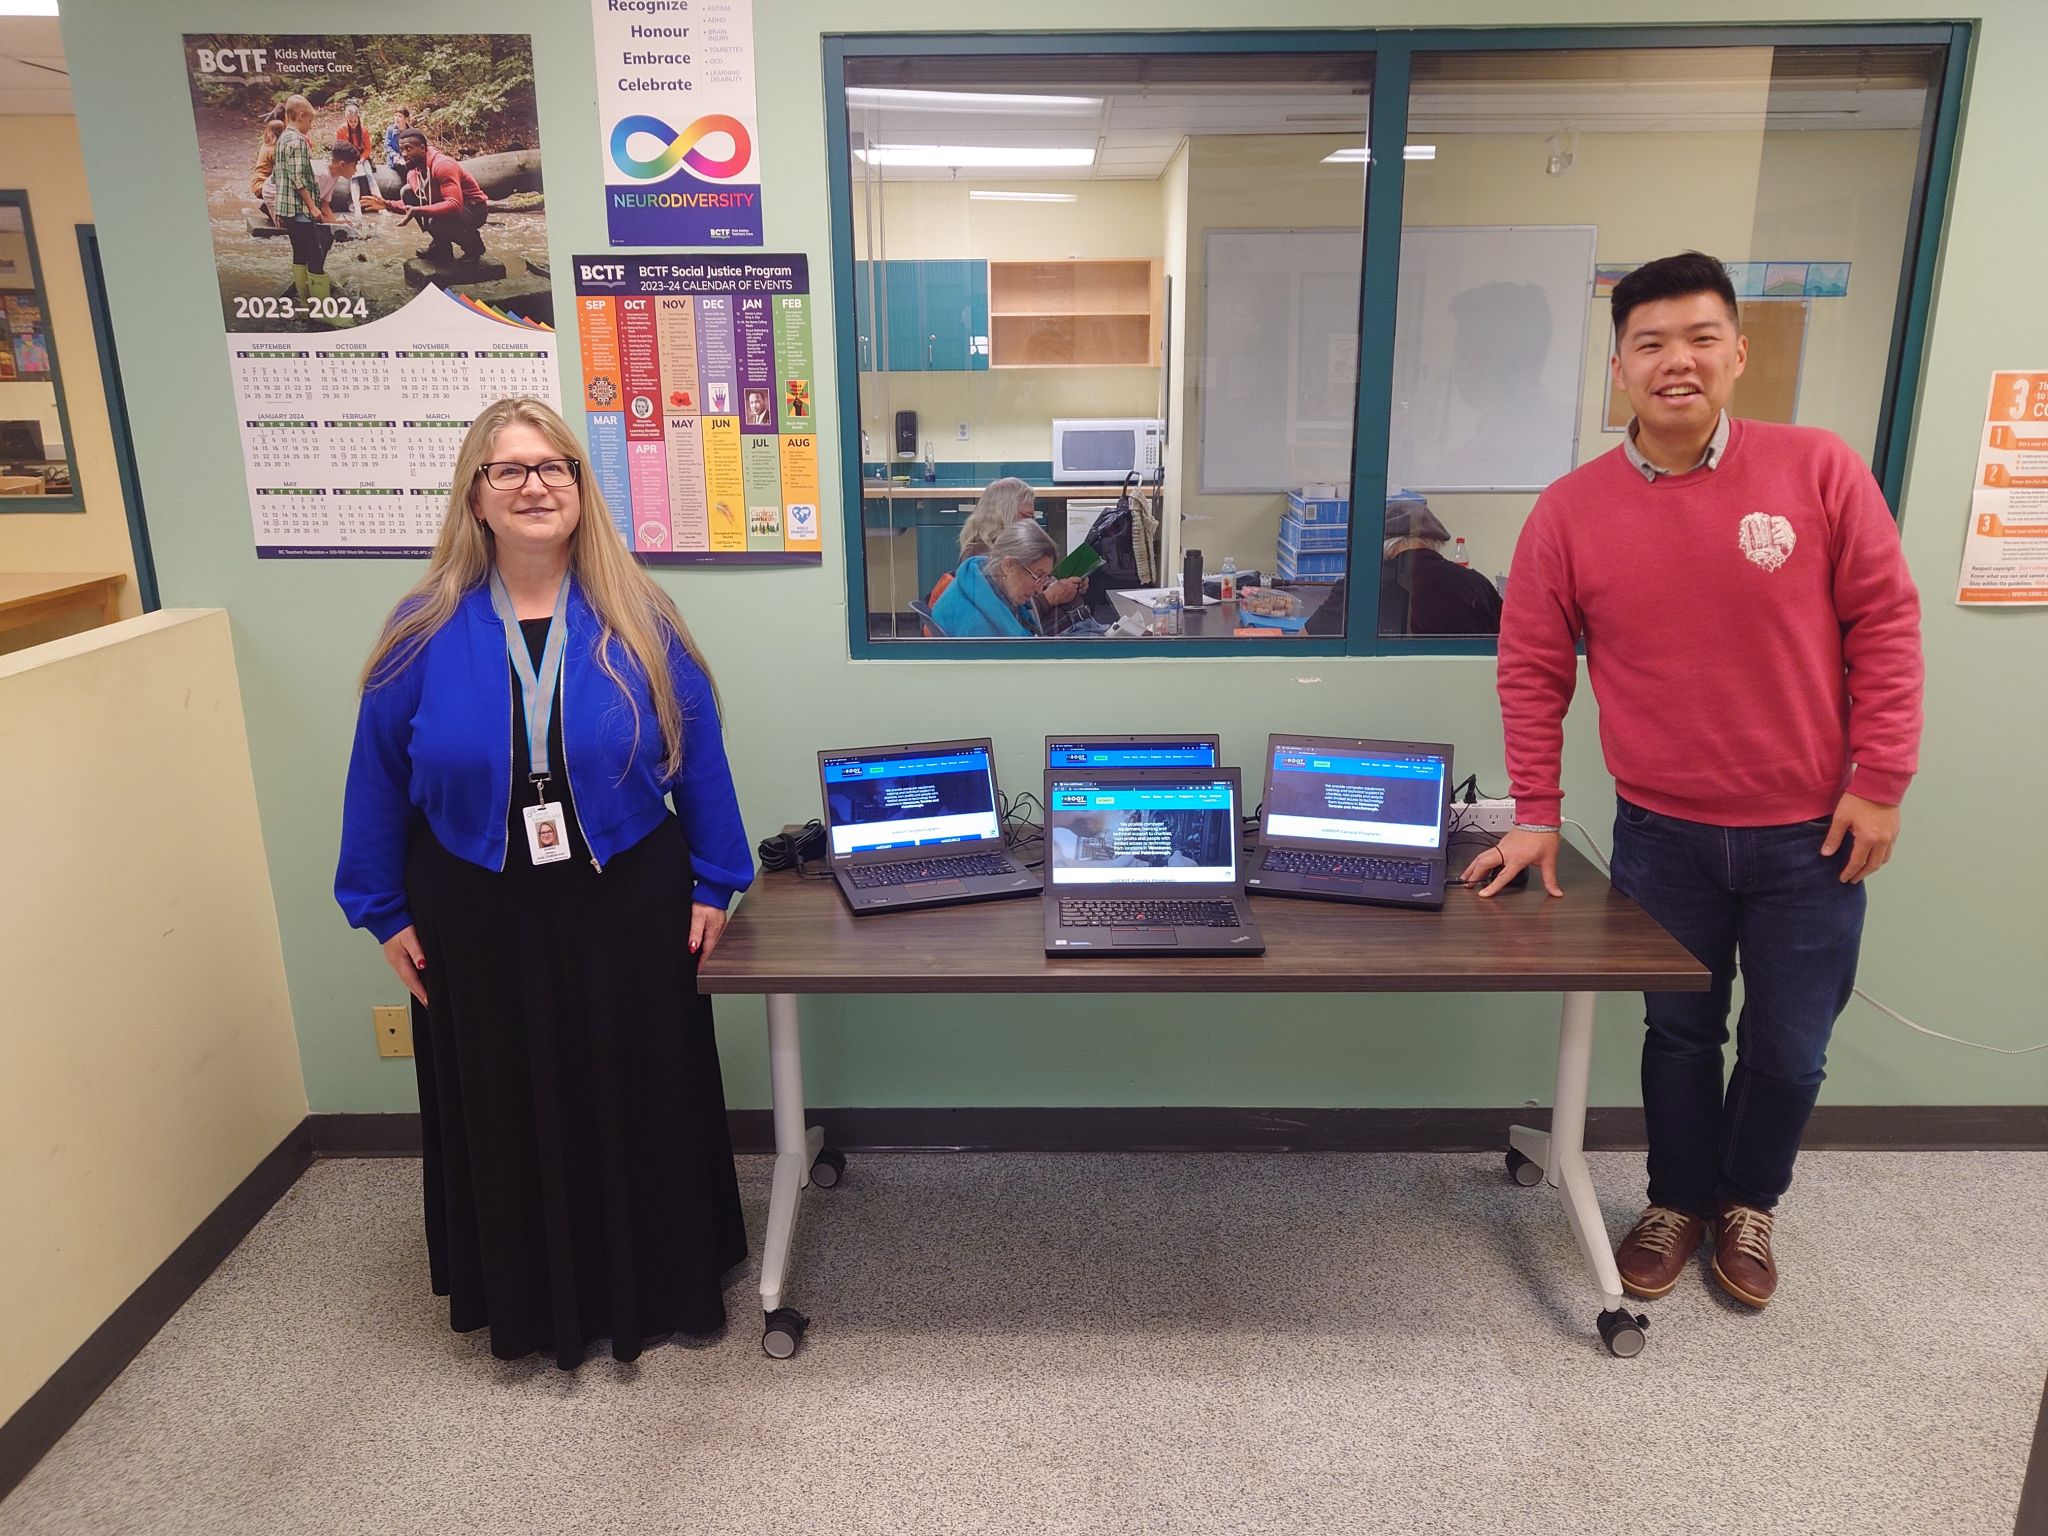 Marnie from the Gathering Place Community Centre in downtown Vancouver poses with Steve Lee and some of the laptops reBOOT Canada provided for use by the Gathering Place's clients.